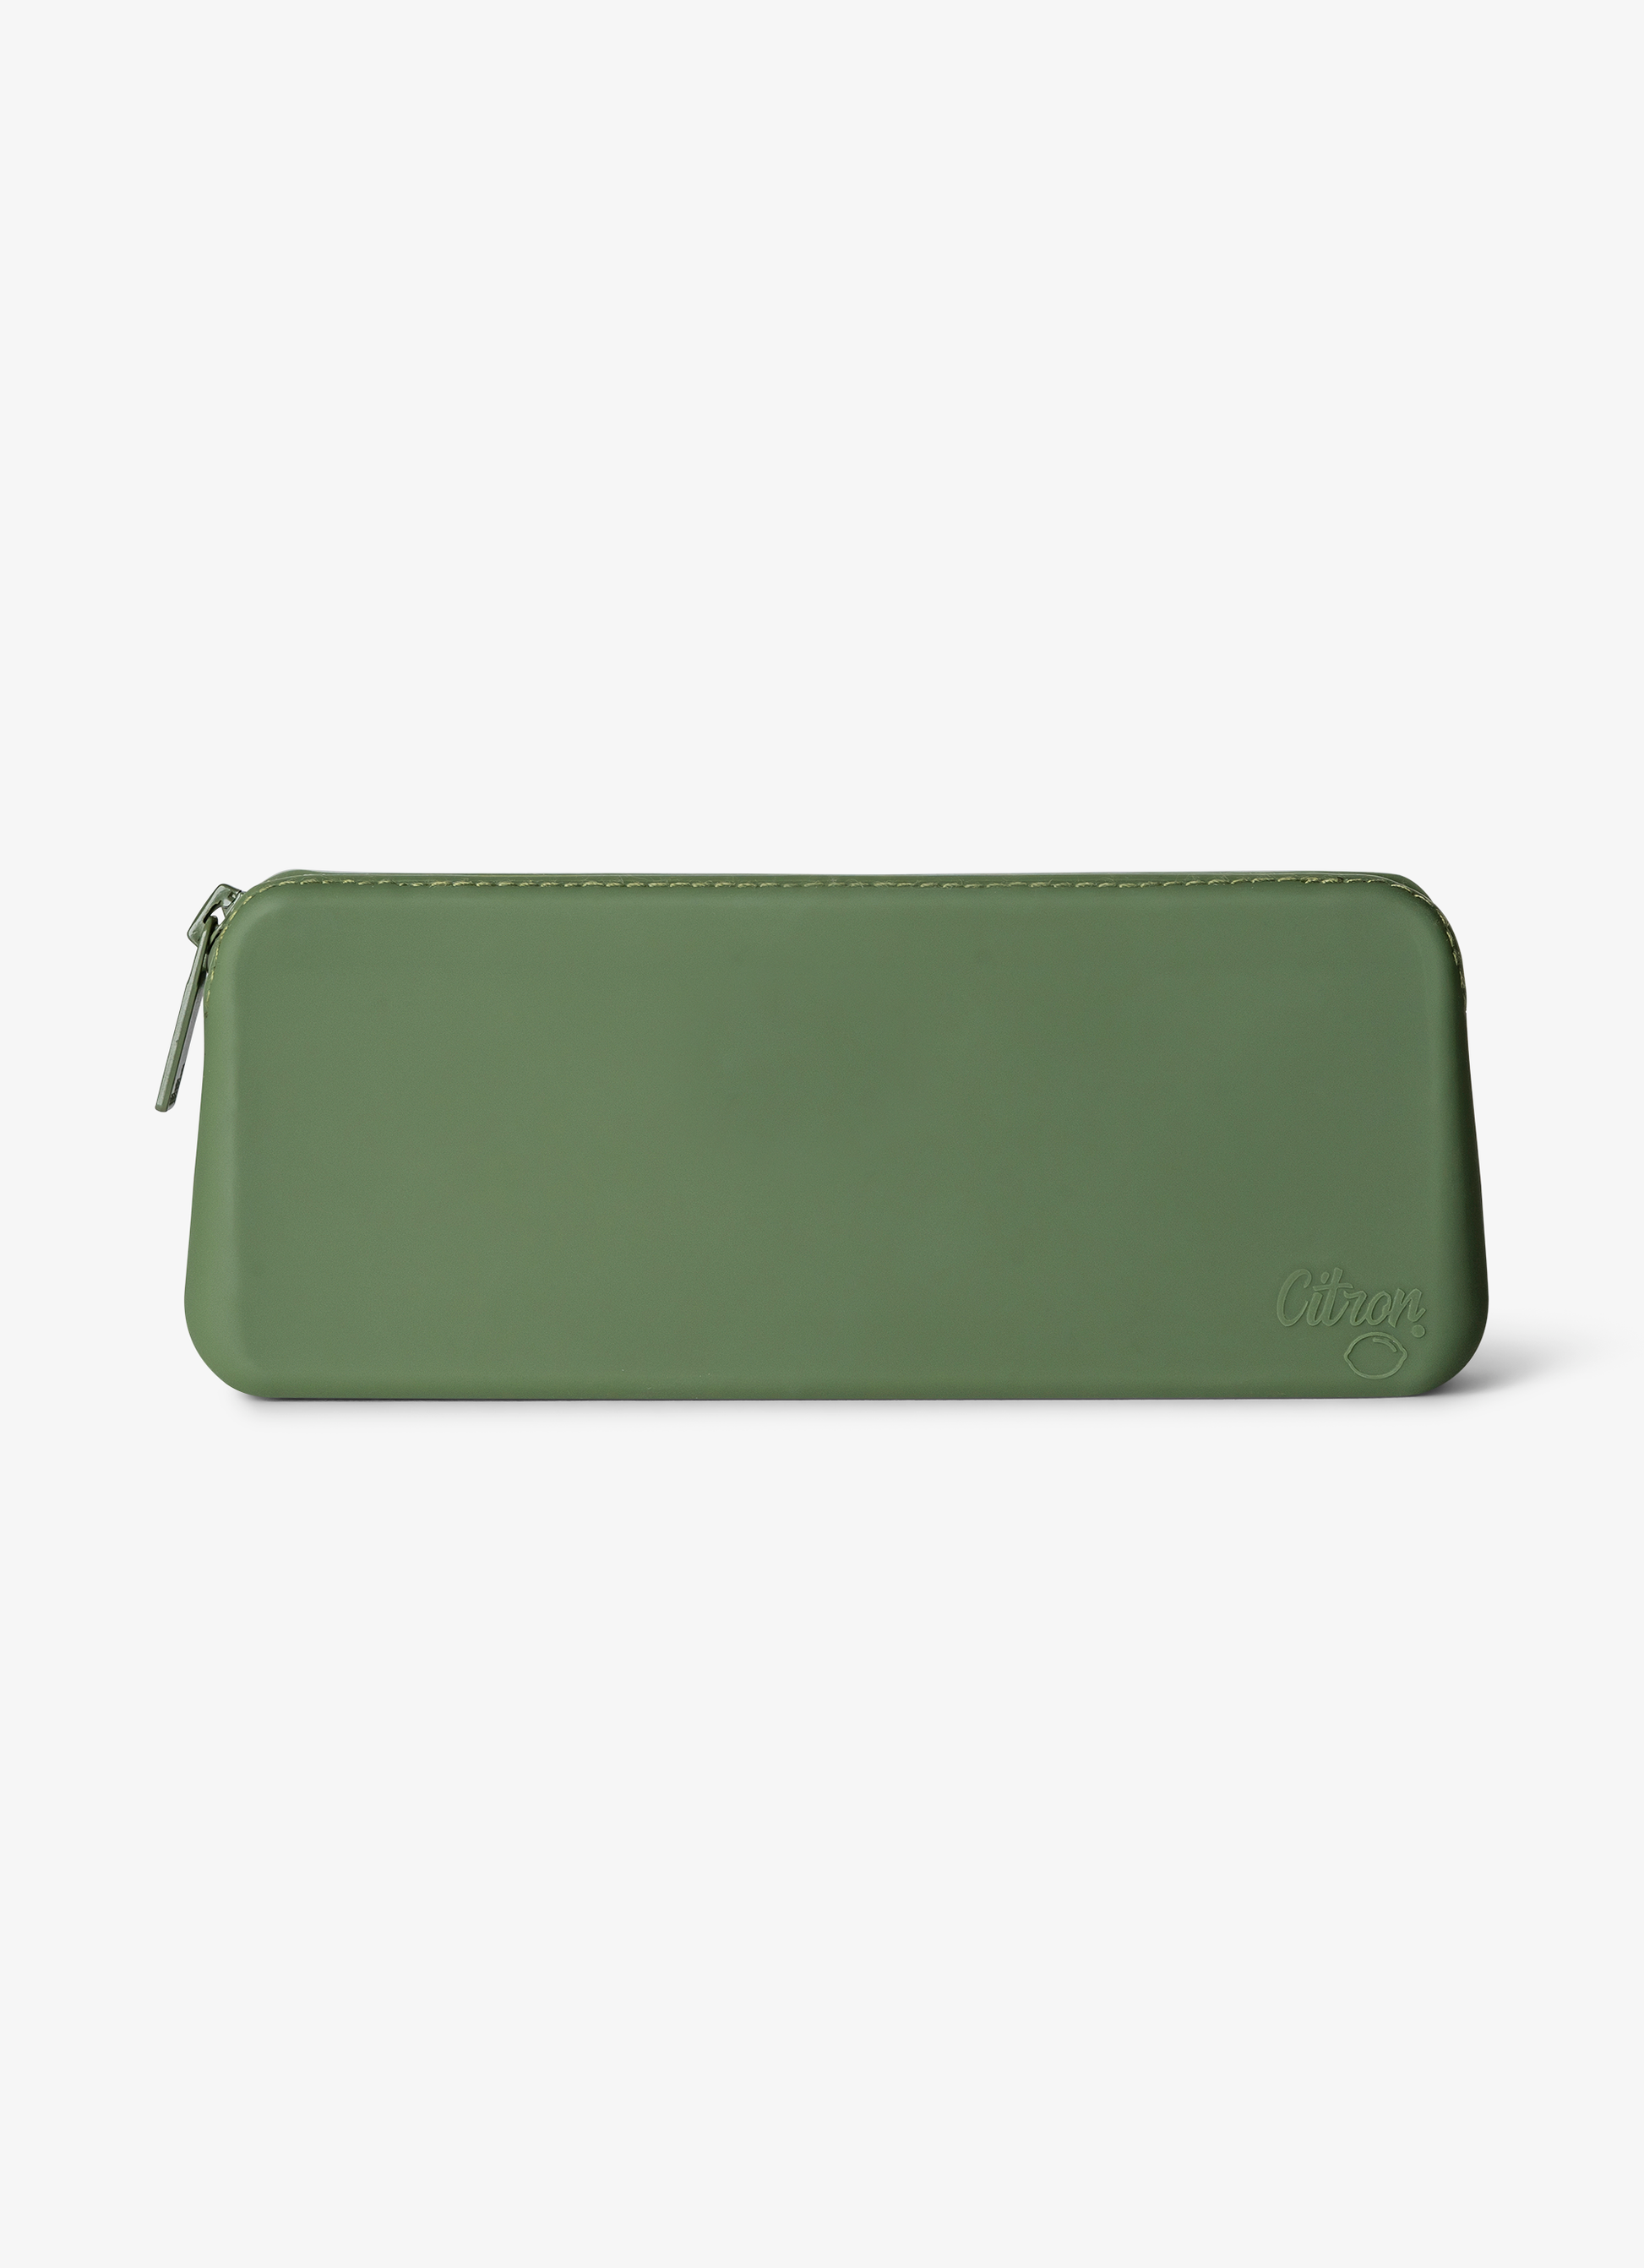 Citron Silicone Cutlery Pouch - Green - Laadlee